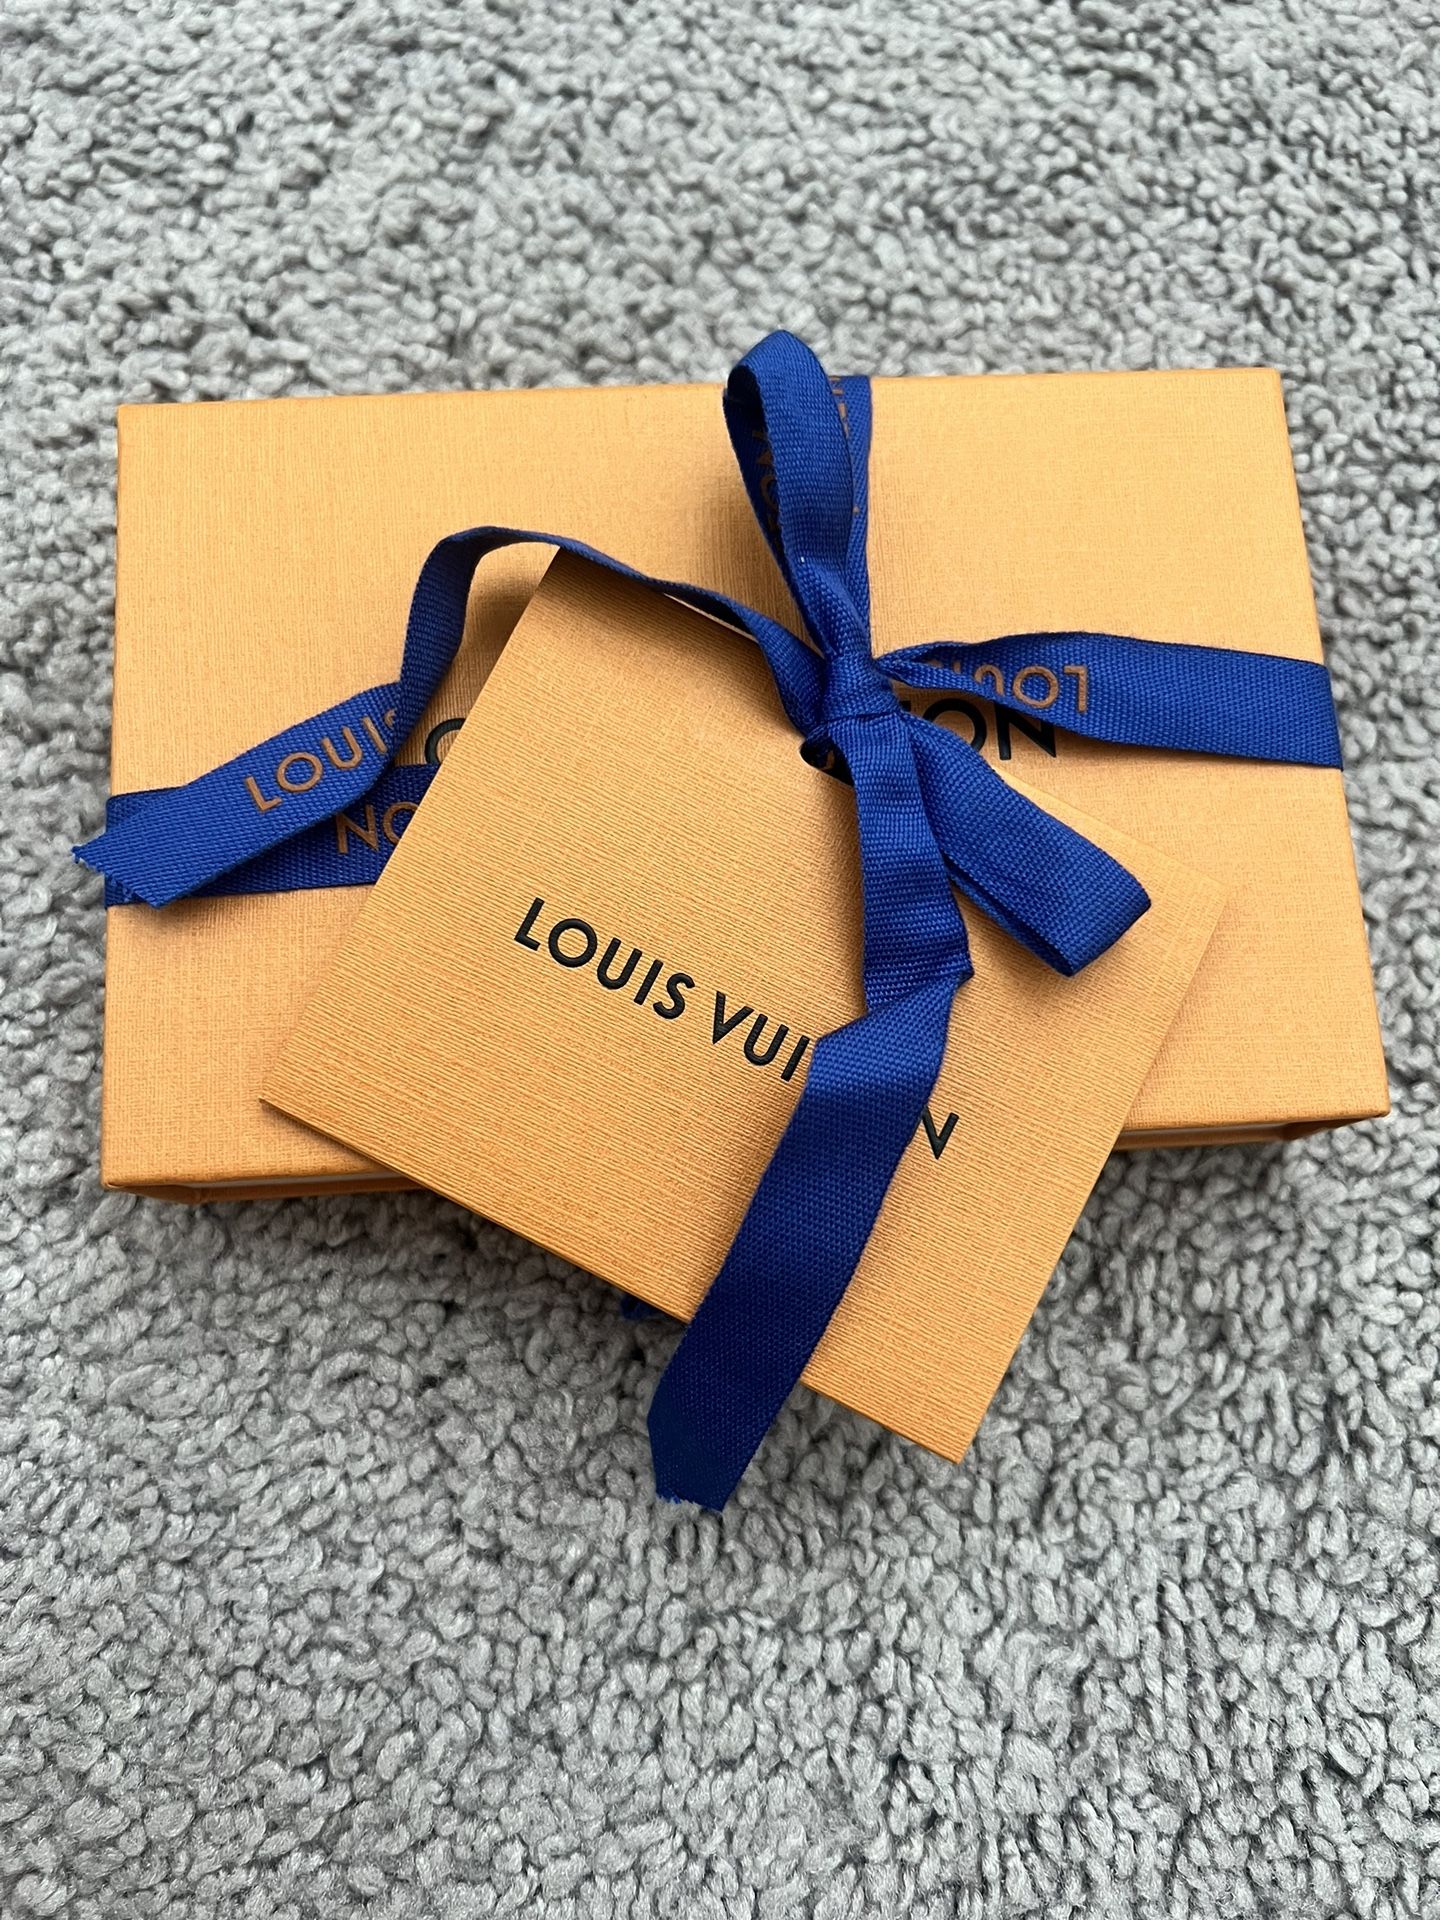 Authentic Louis Vuitton Louise GM Hoop Earrings, Brand New With